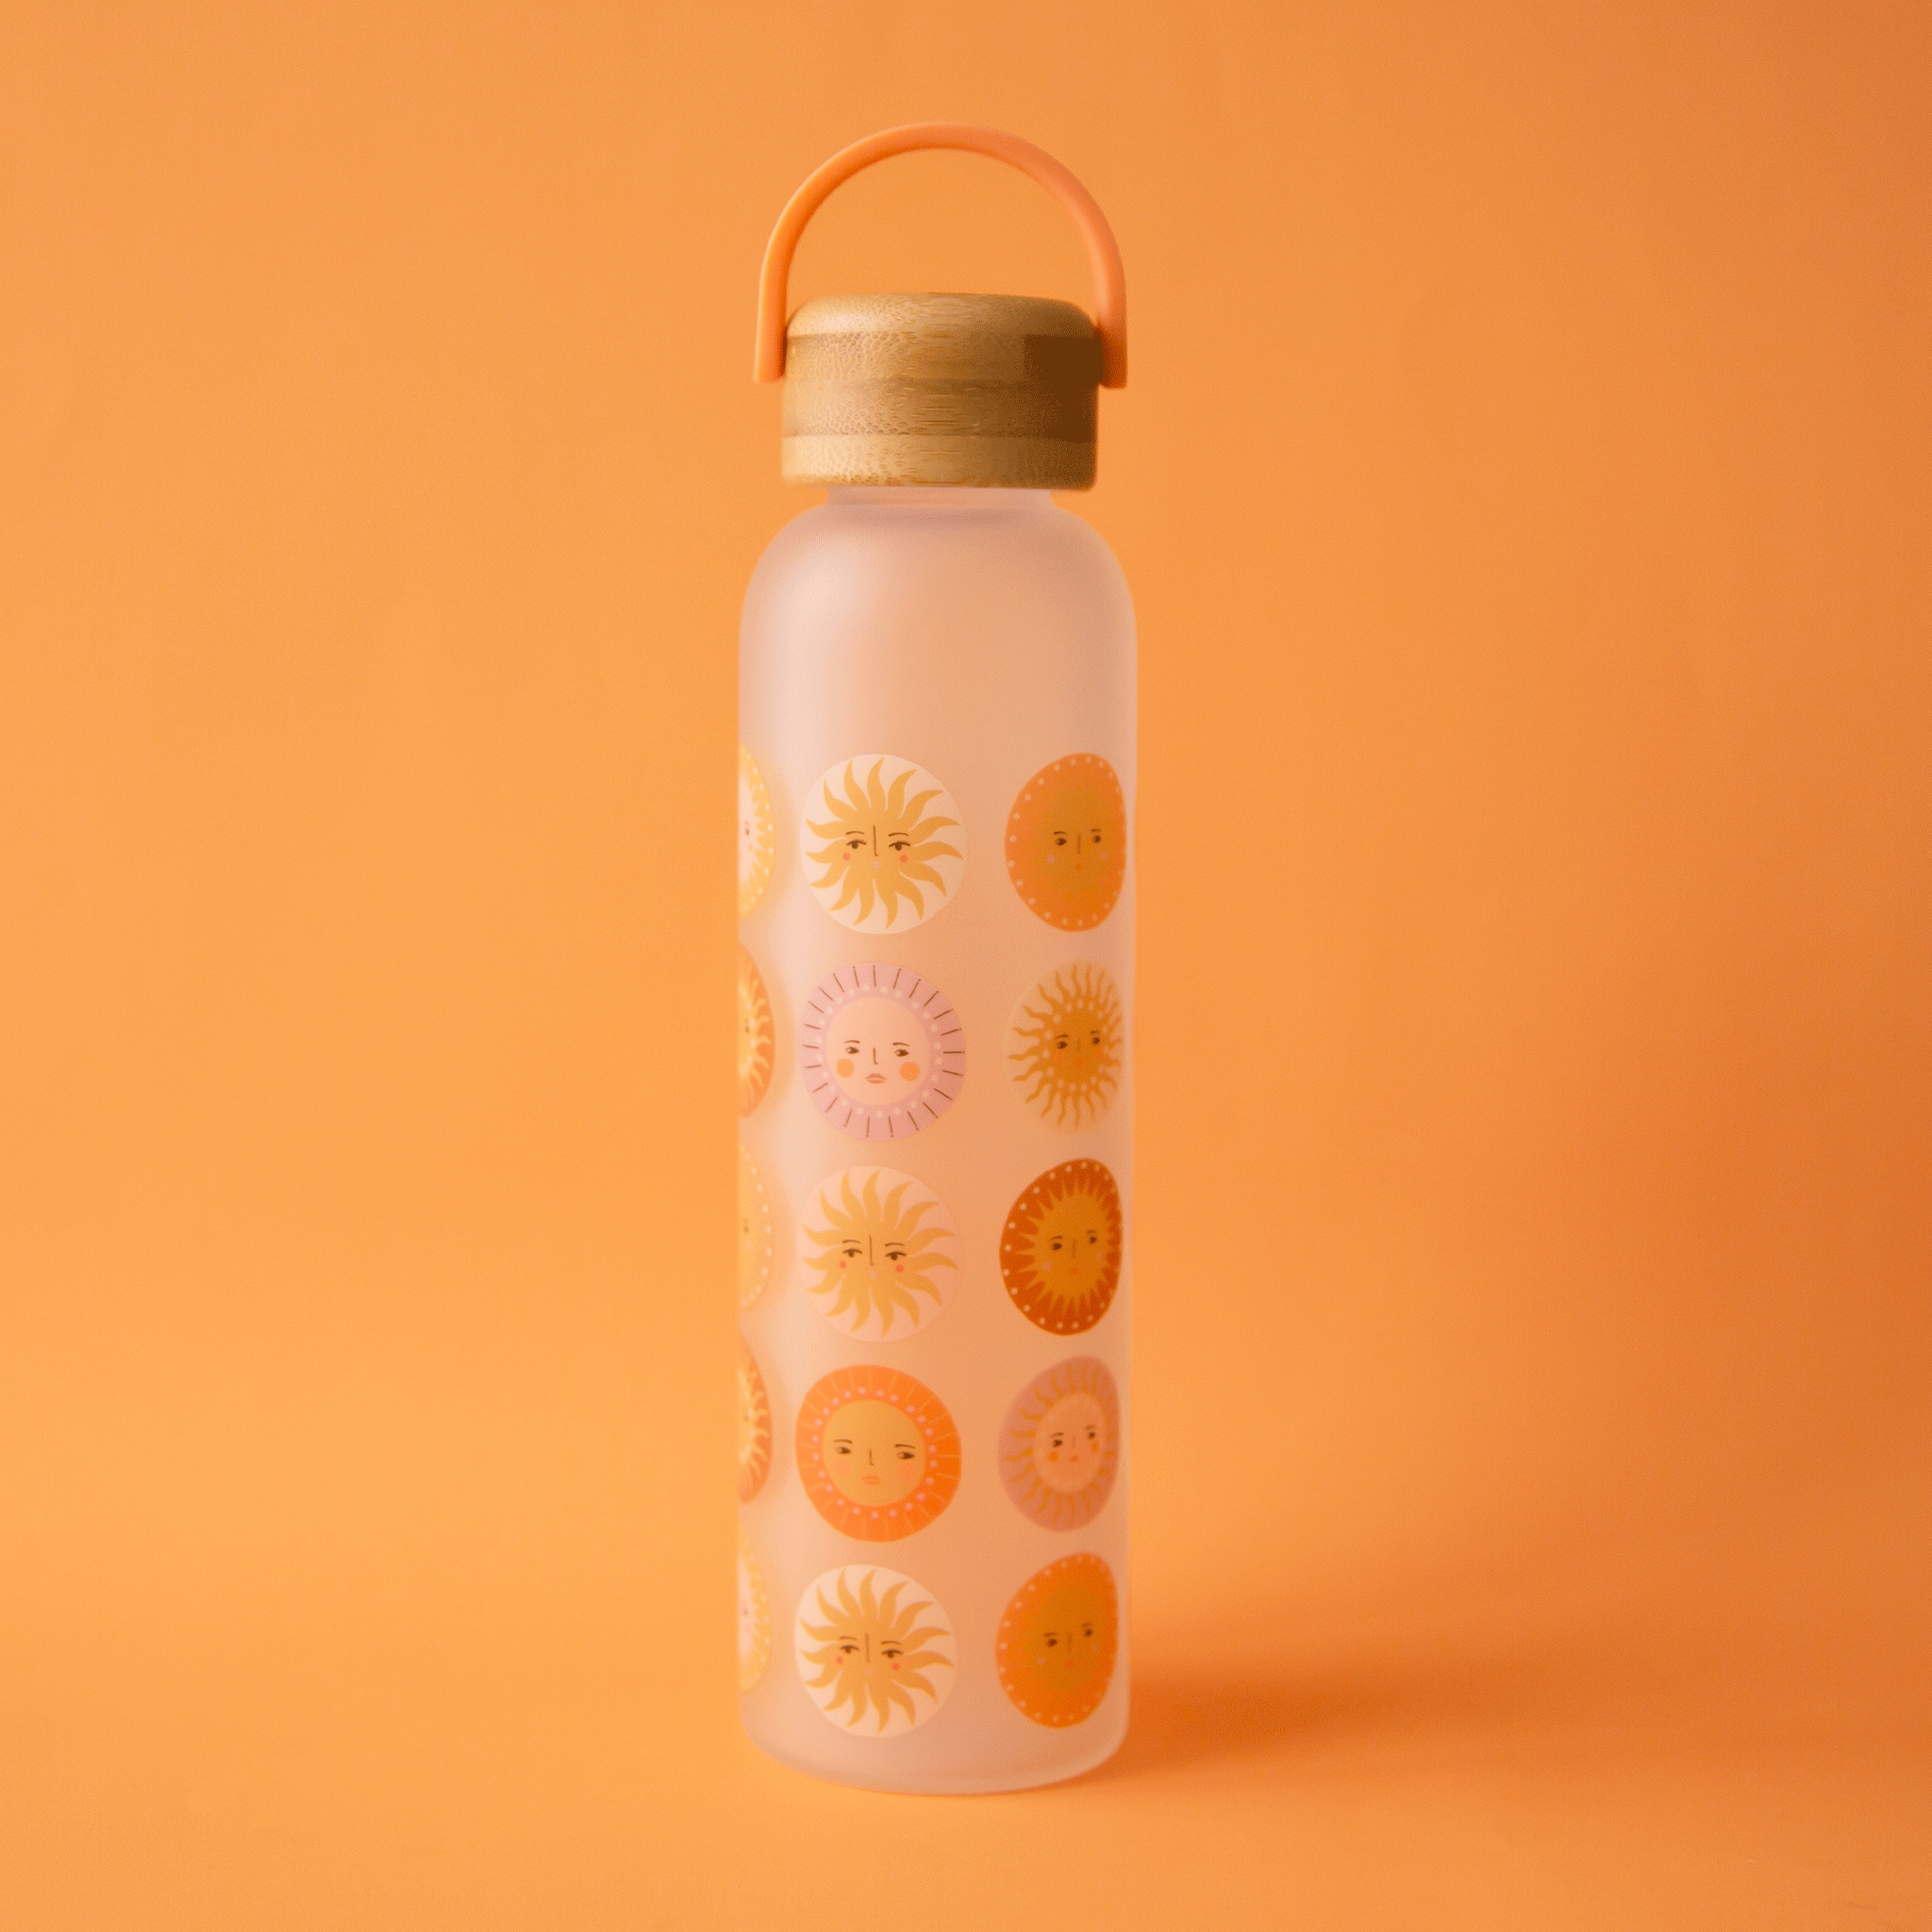 On an orange background is a water bottle with various sun patterns and a wood lid with an orange loop for carrying. 